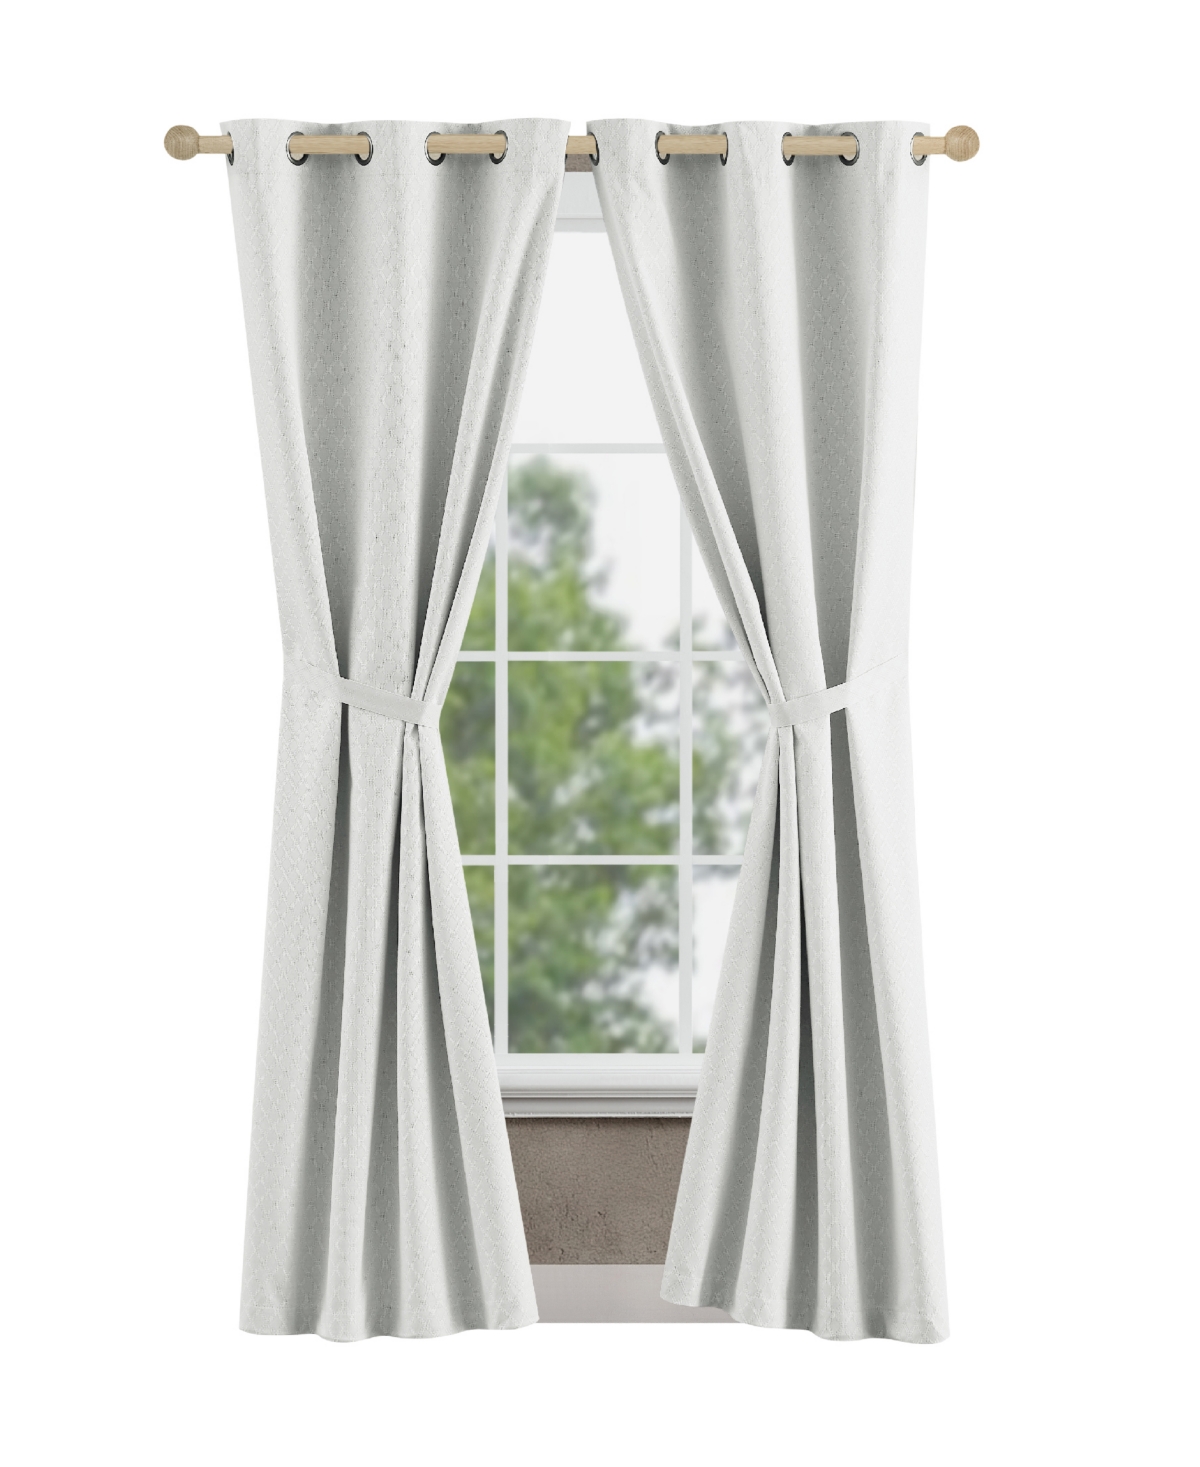 Jessica Simpson Faye Textured Blackout Grommet Window Curtain Panel Pair With Tiebacks, 38" X 96" In White